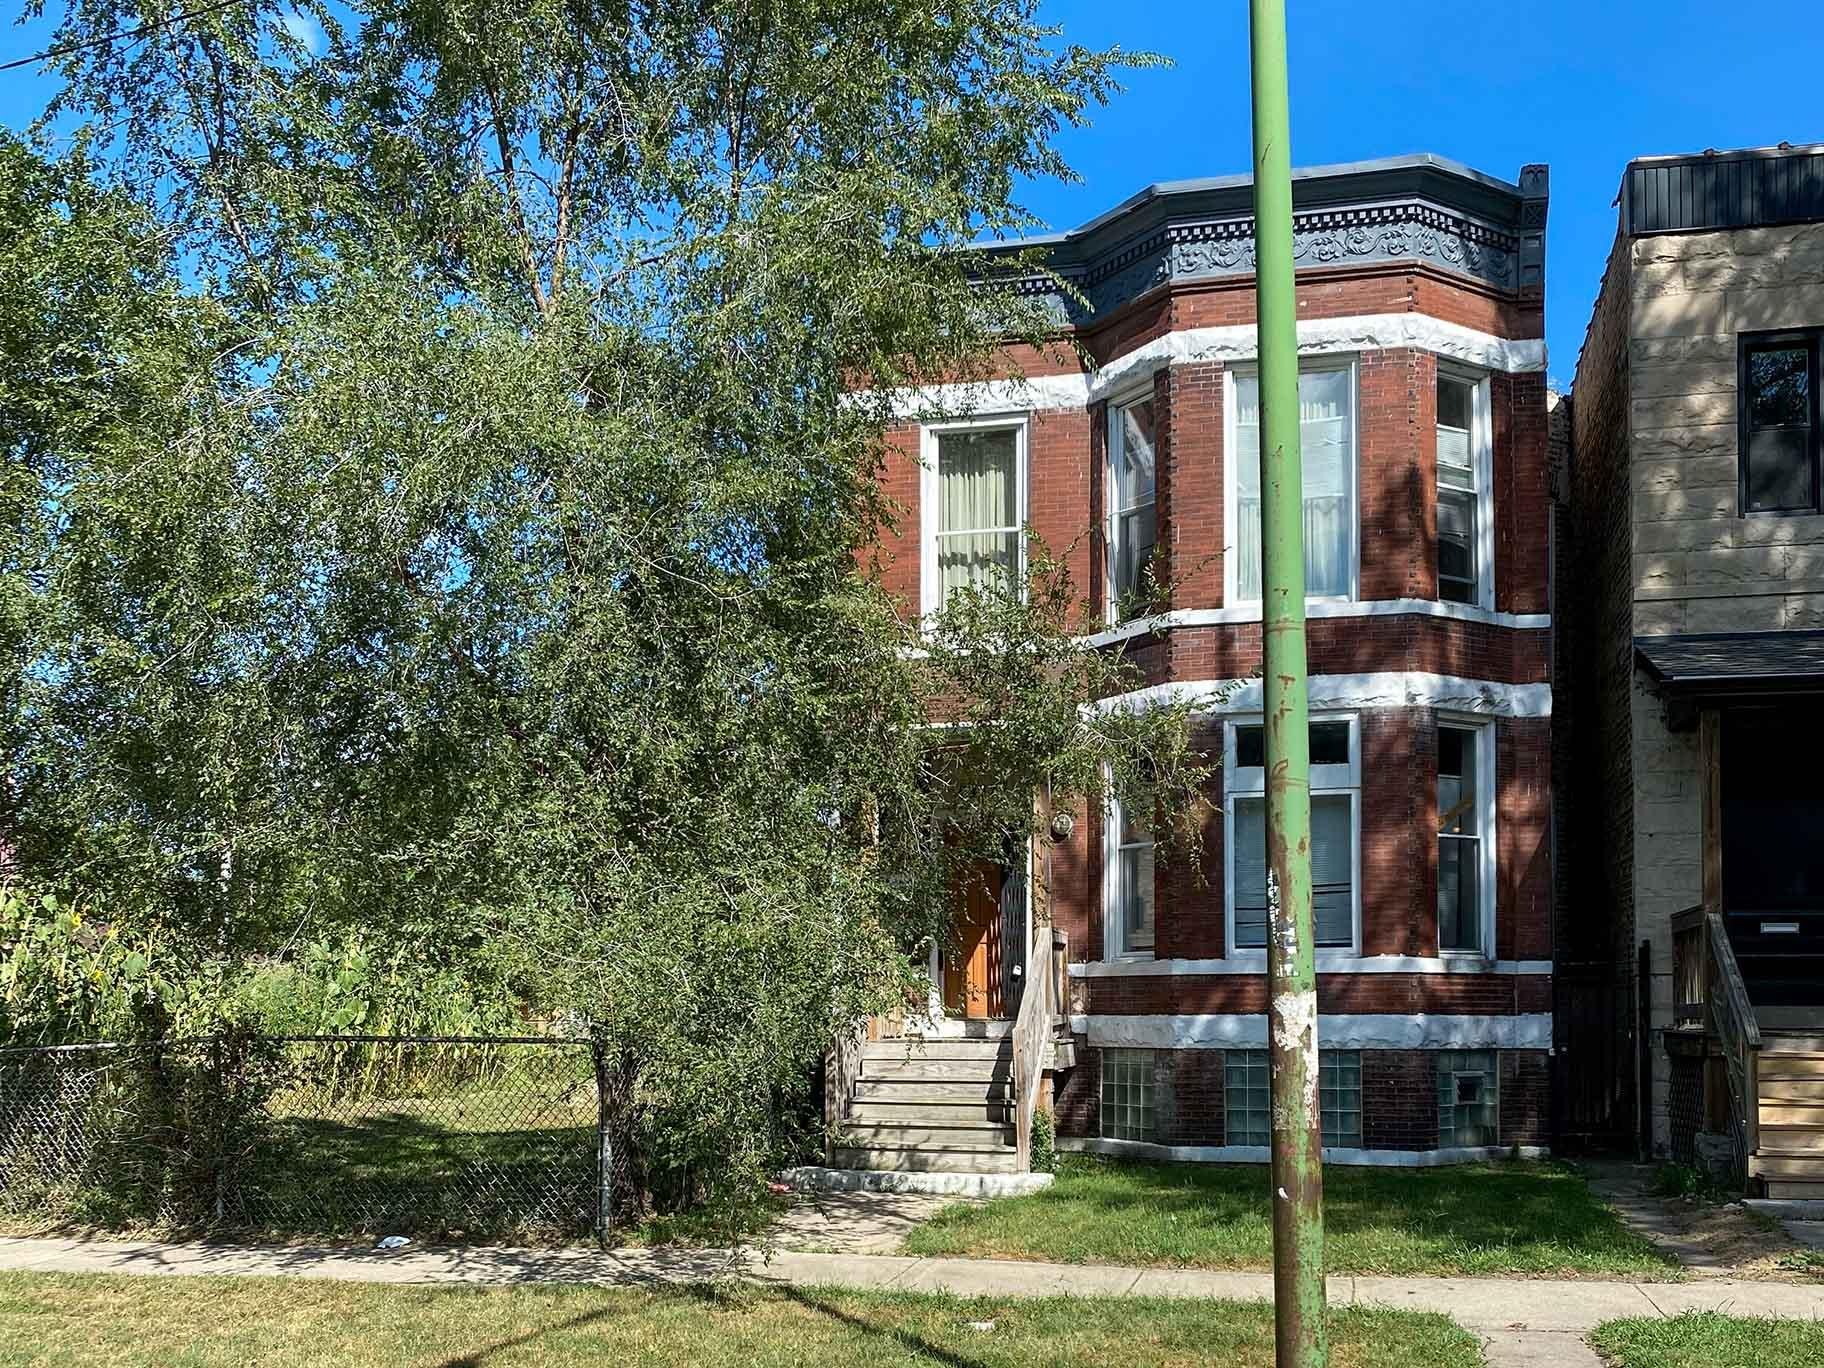 The former home of Emmett Till and his mother, Mamie Till-Mobley, at 6427 S. St. Lawrence Ave. in Chicago’s Woodlawn community. (Credit: Jonathan Solomon)